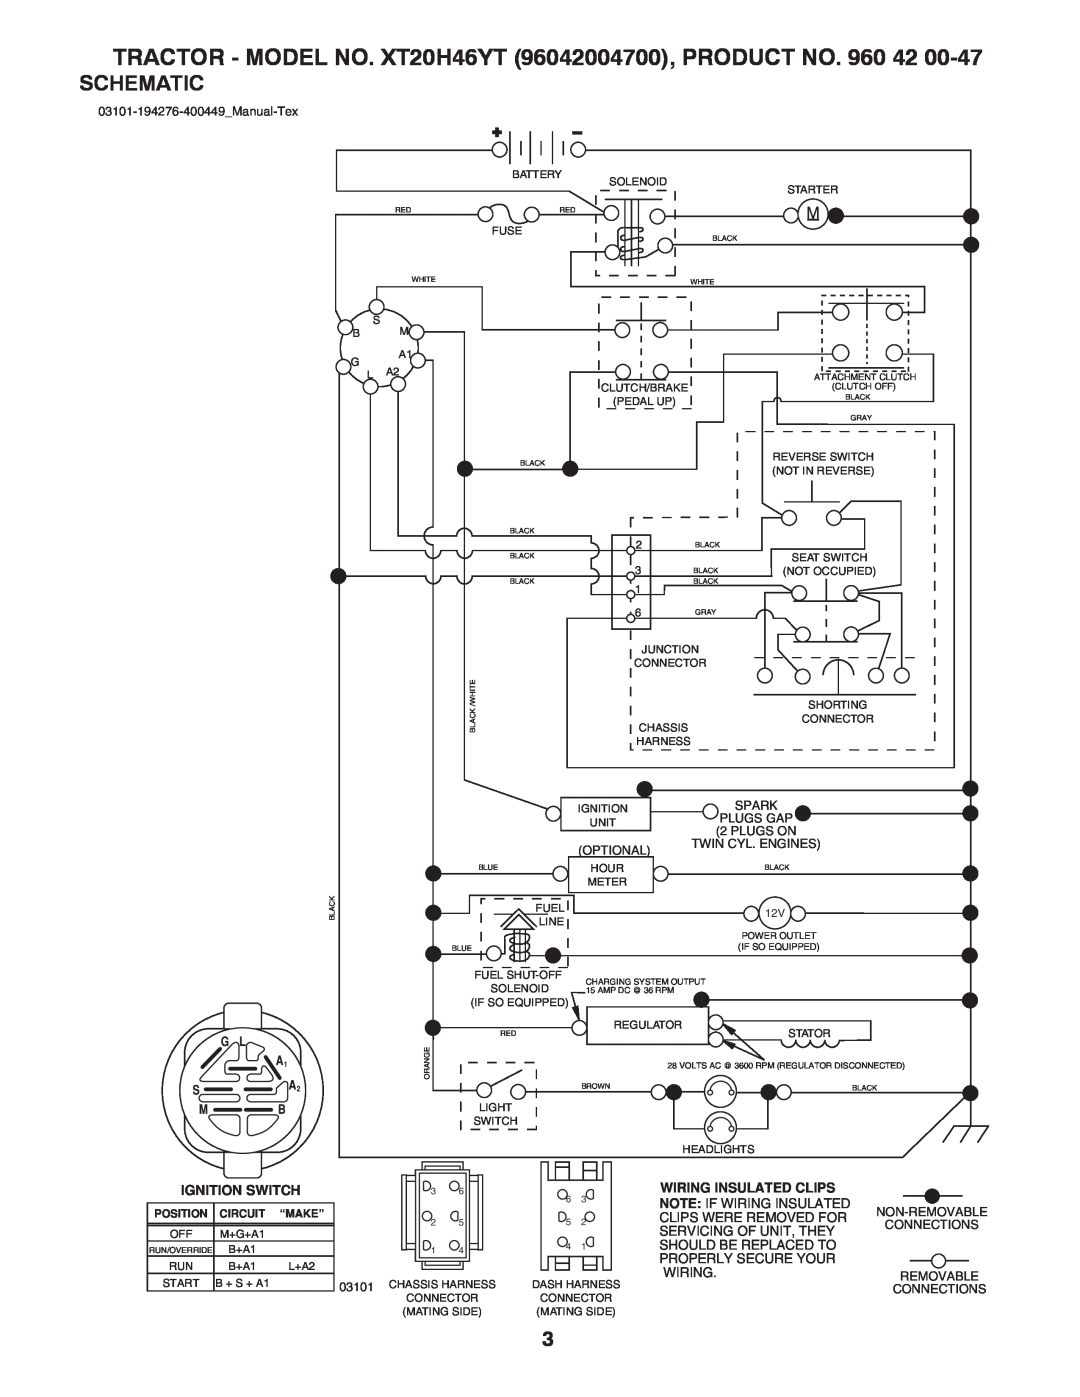 Poulan 412413 manual Schematic, TRACTOR - MODEL NO. XT20H46YT 96042004700, PRODUCT NO, Optional 